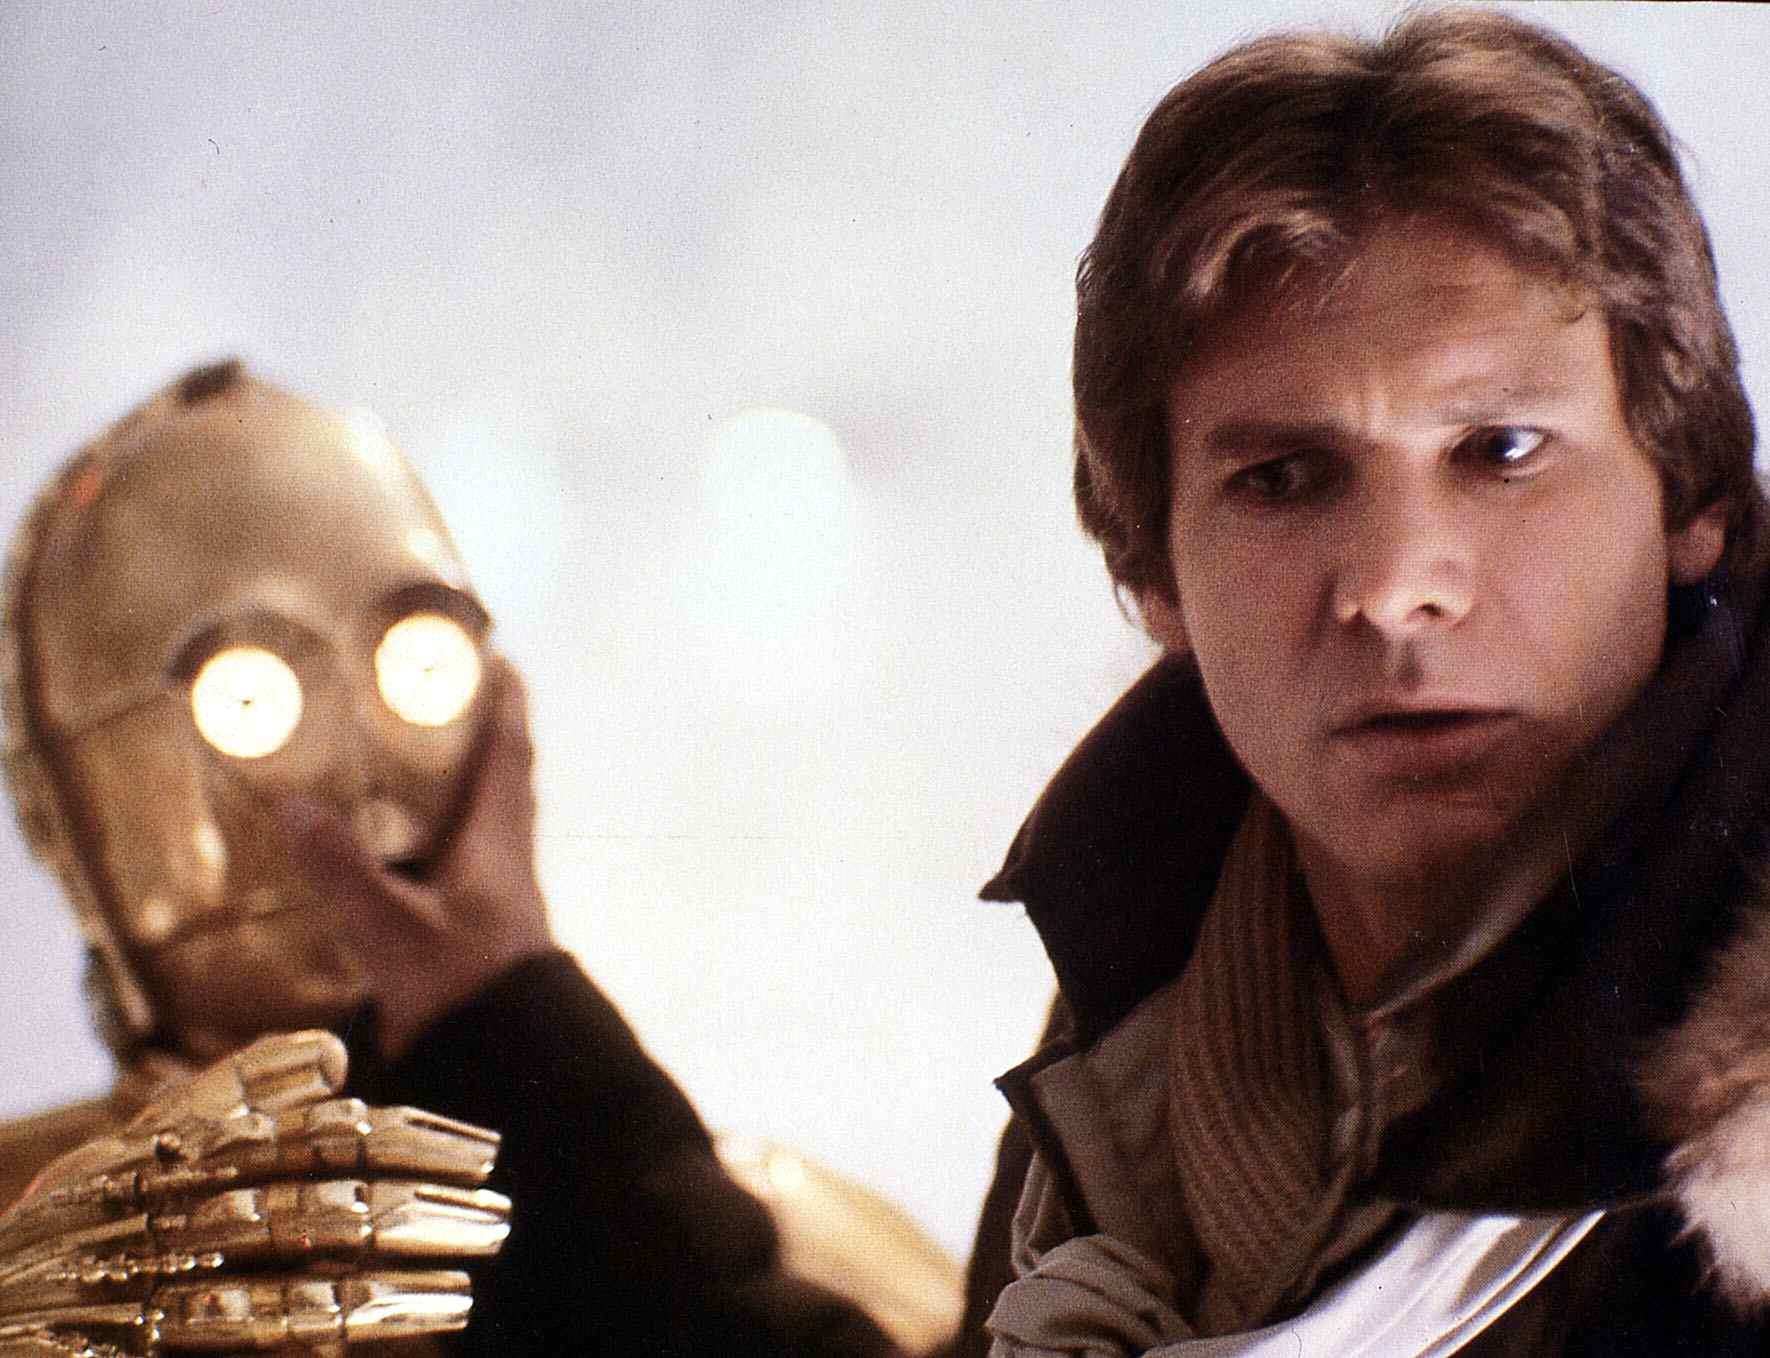 Han Solo putting his hand on C-3PO